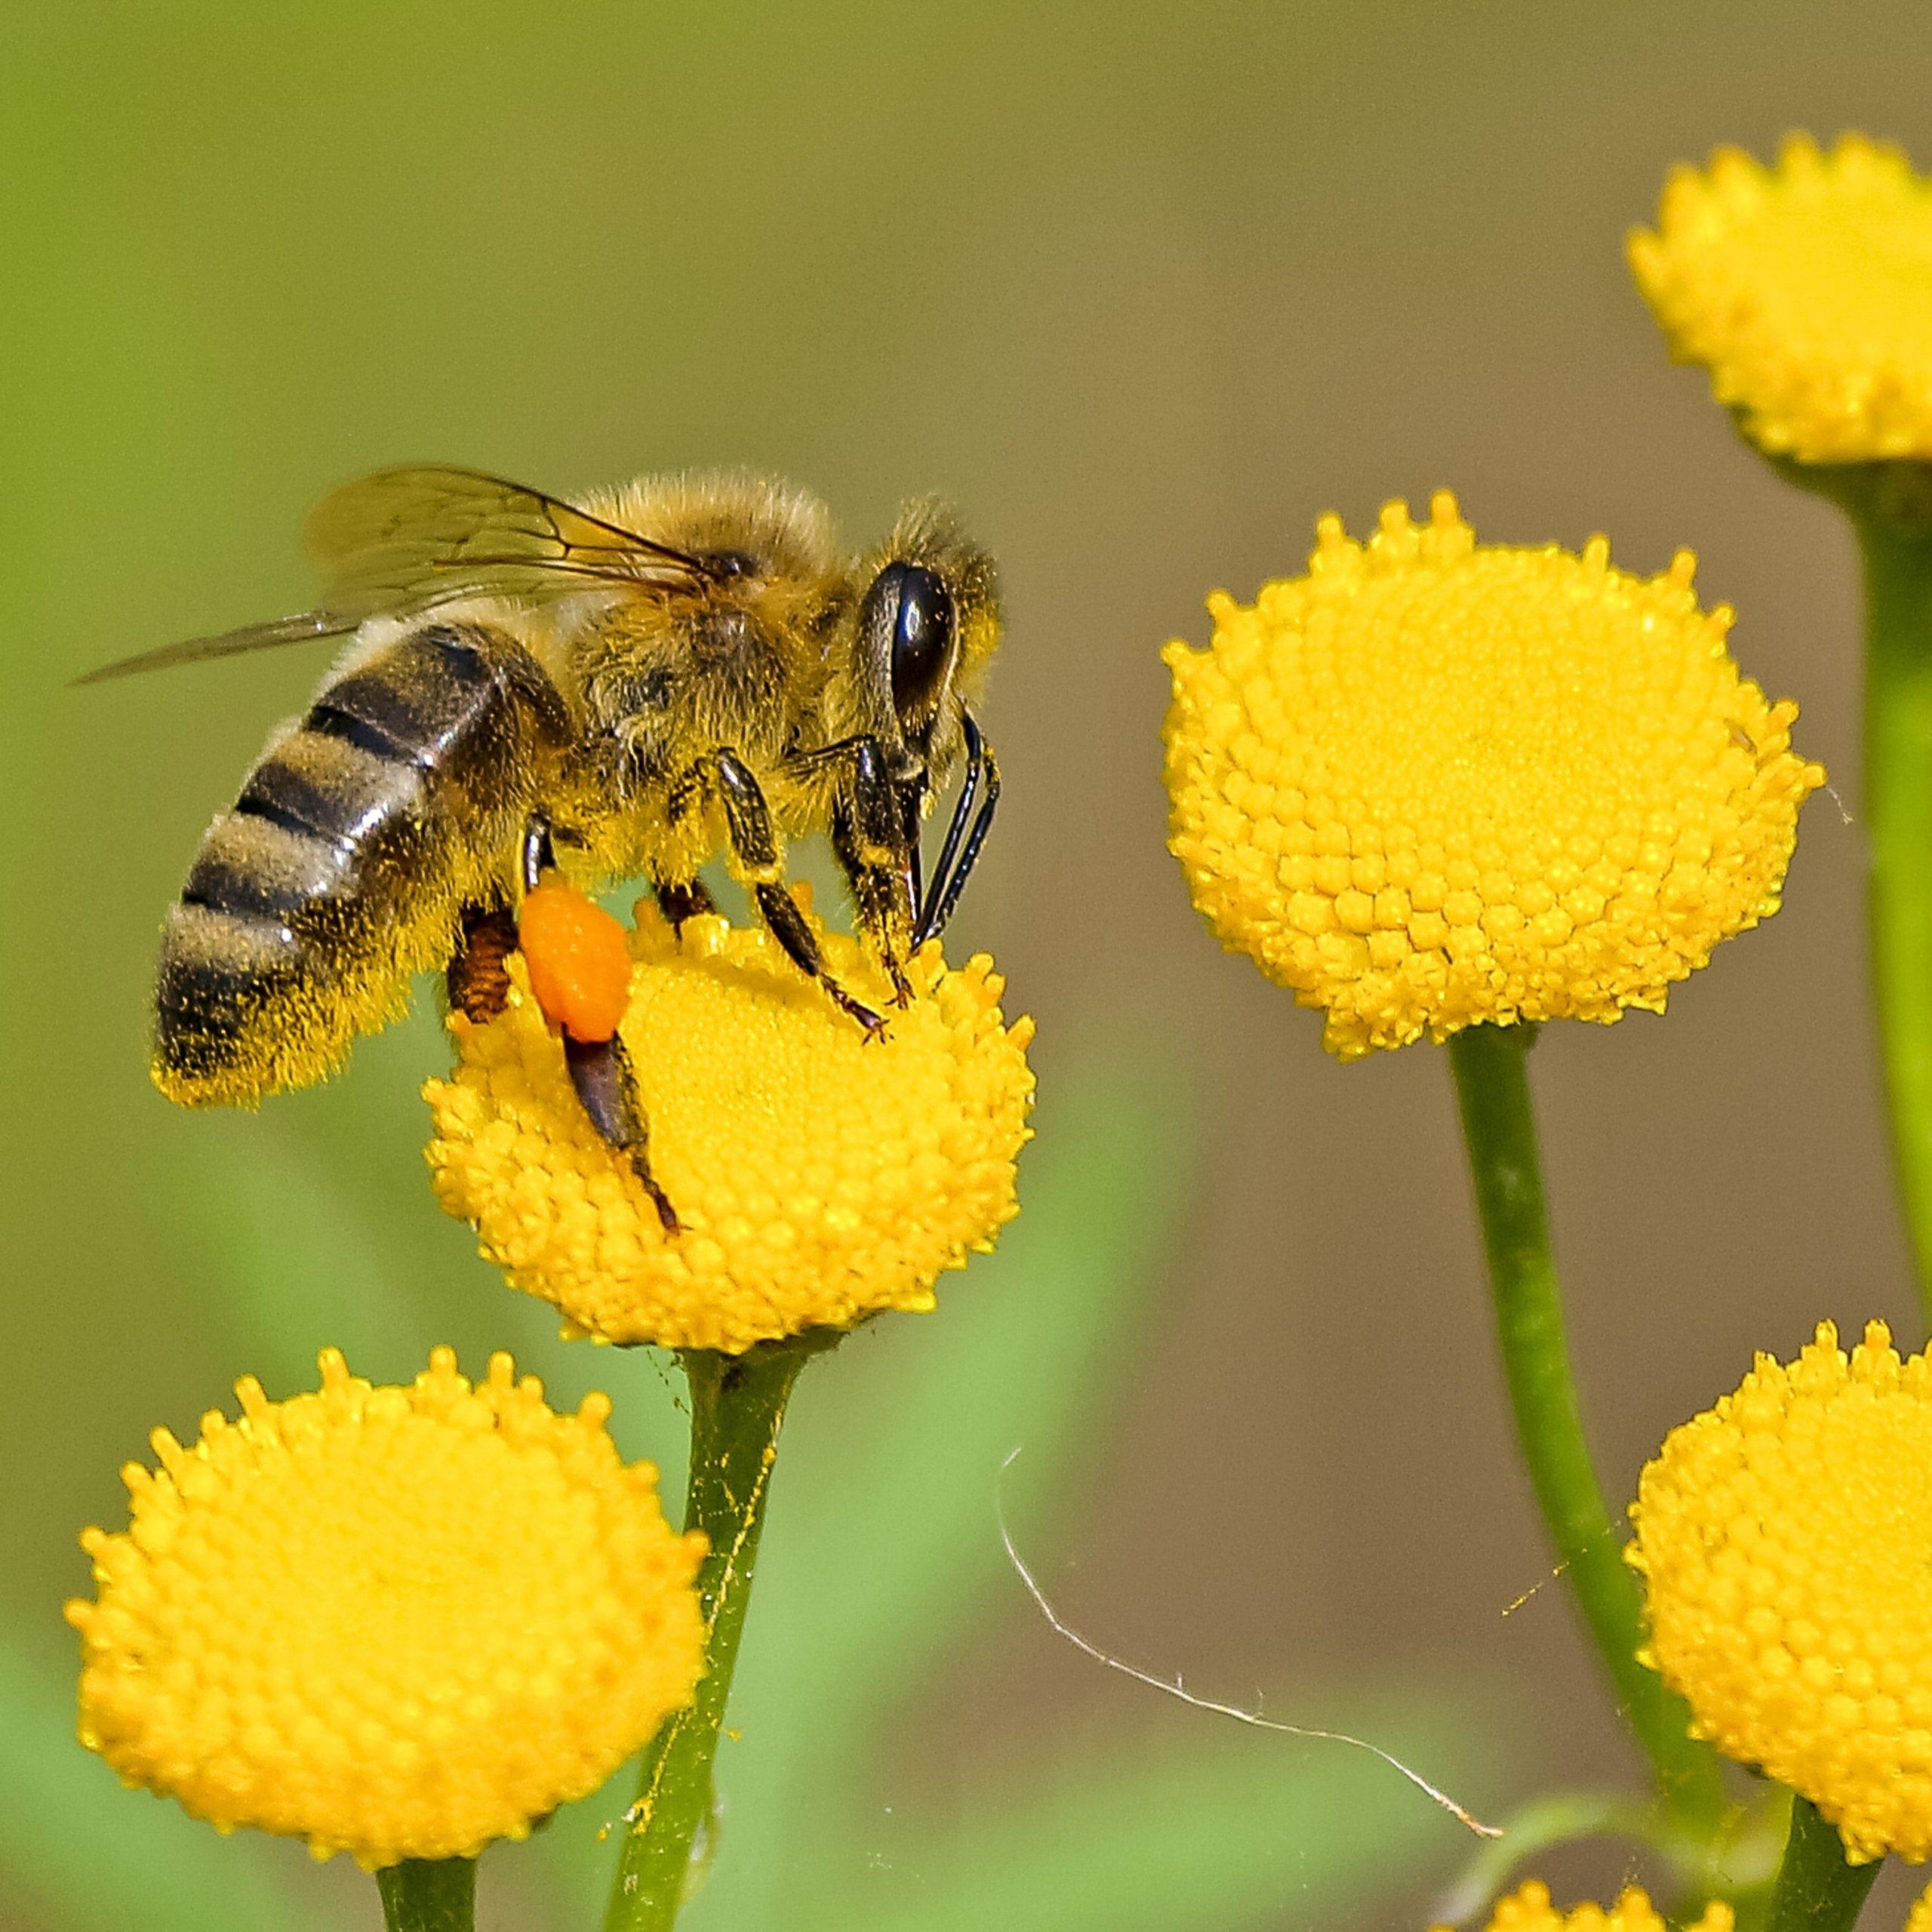 Importance of pollination by bees